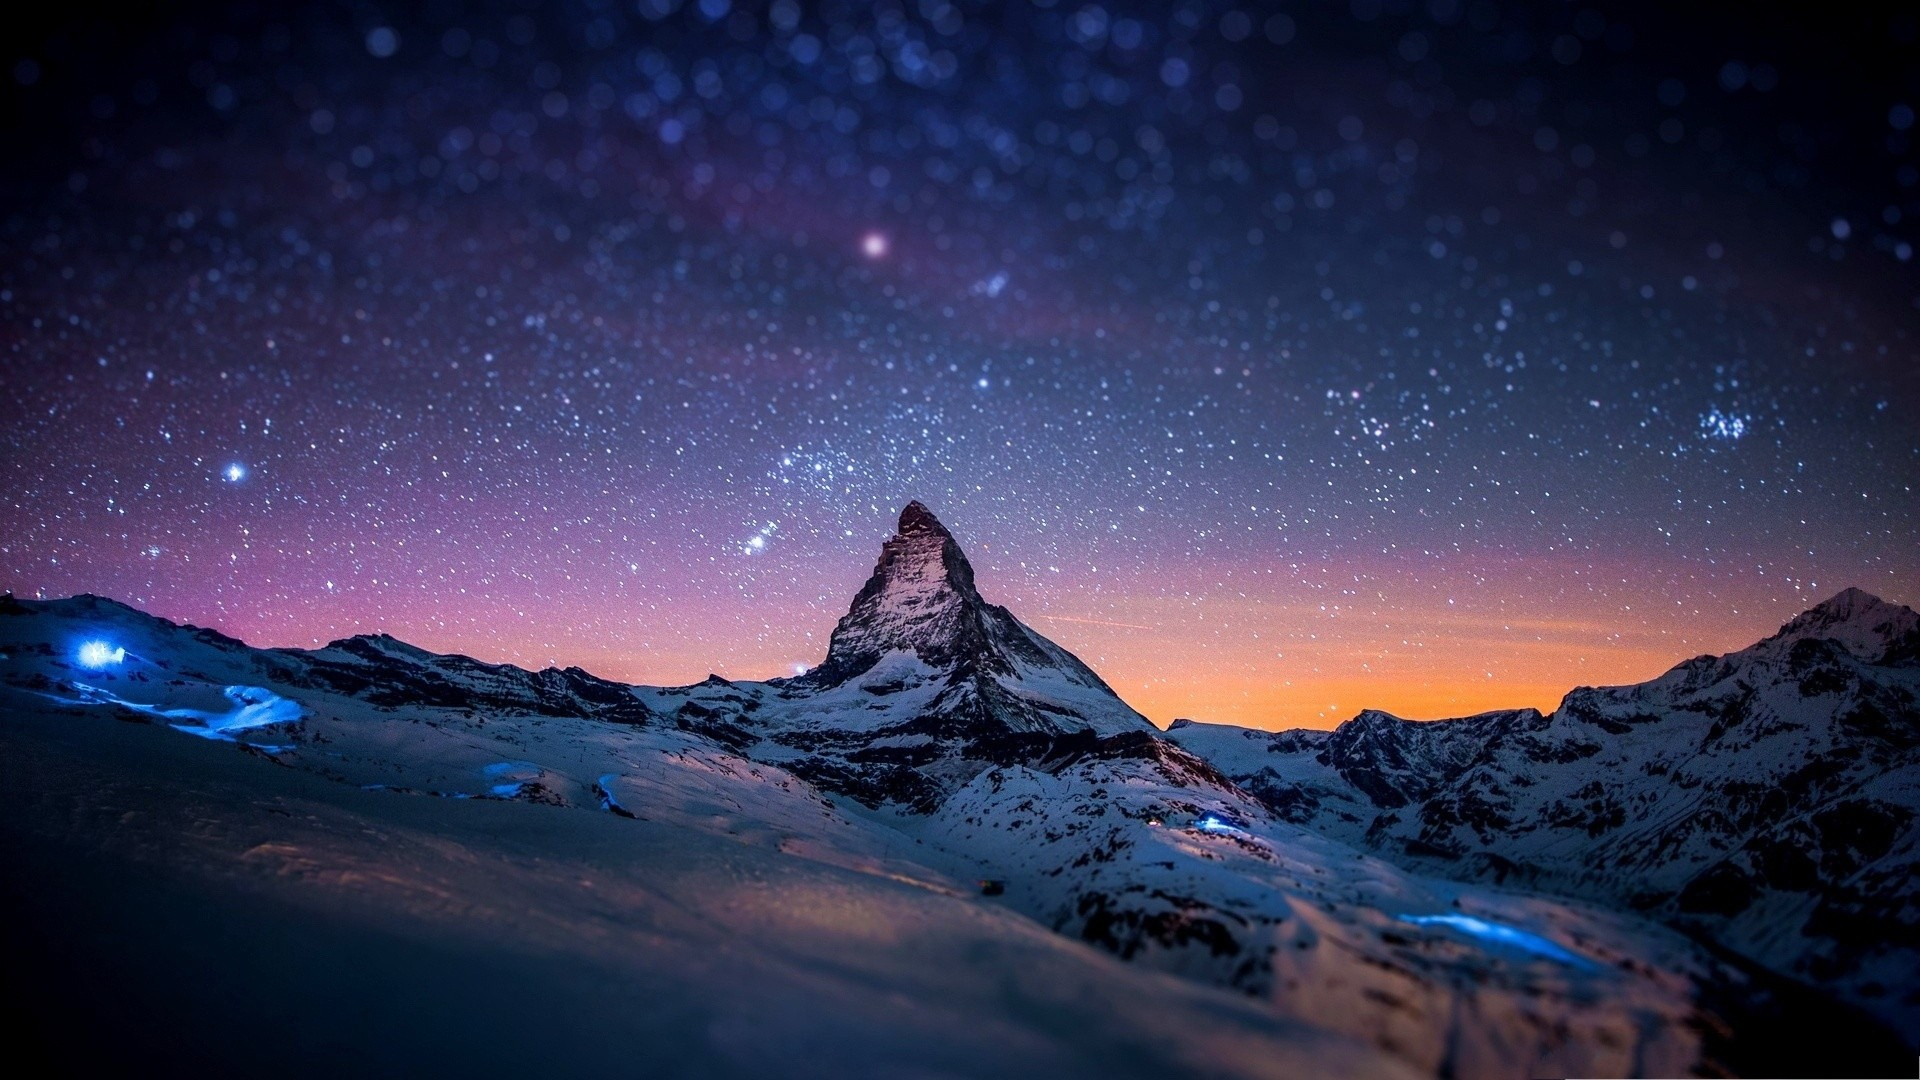 1920x1080 Snowy Winter Night Mountains With Snow Hd Wallpaper For Desk